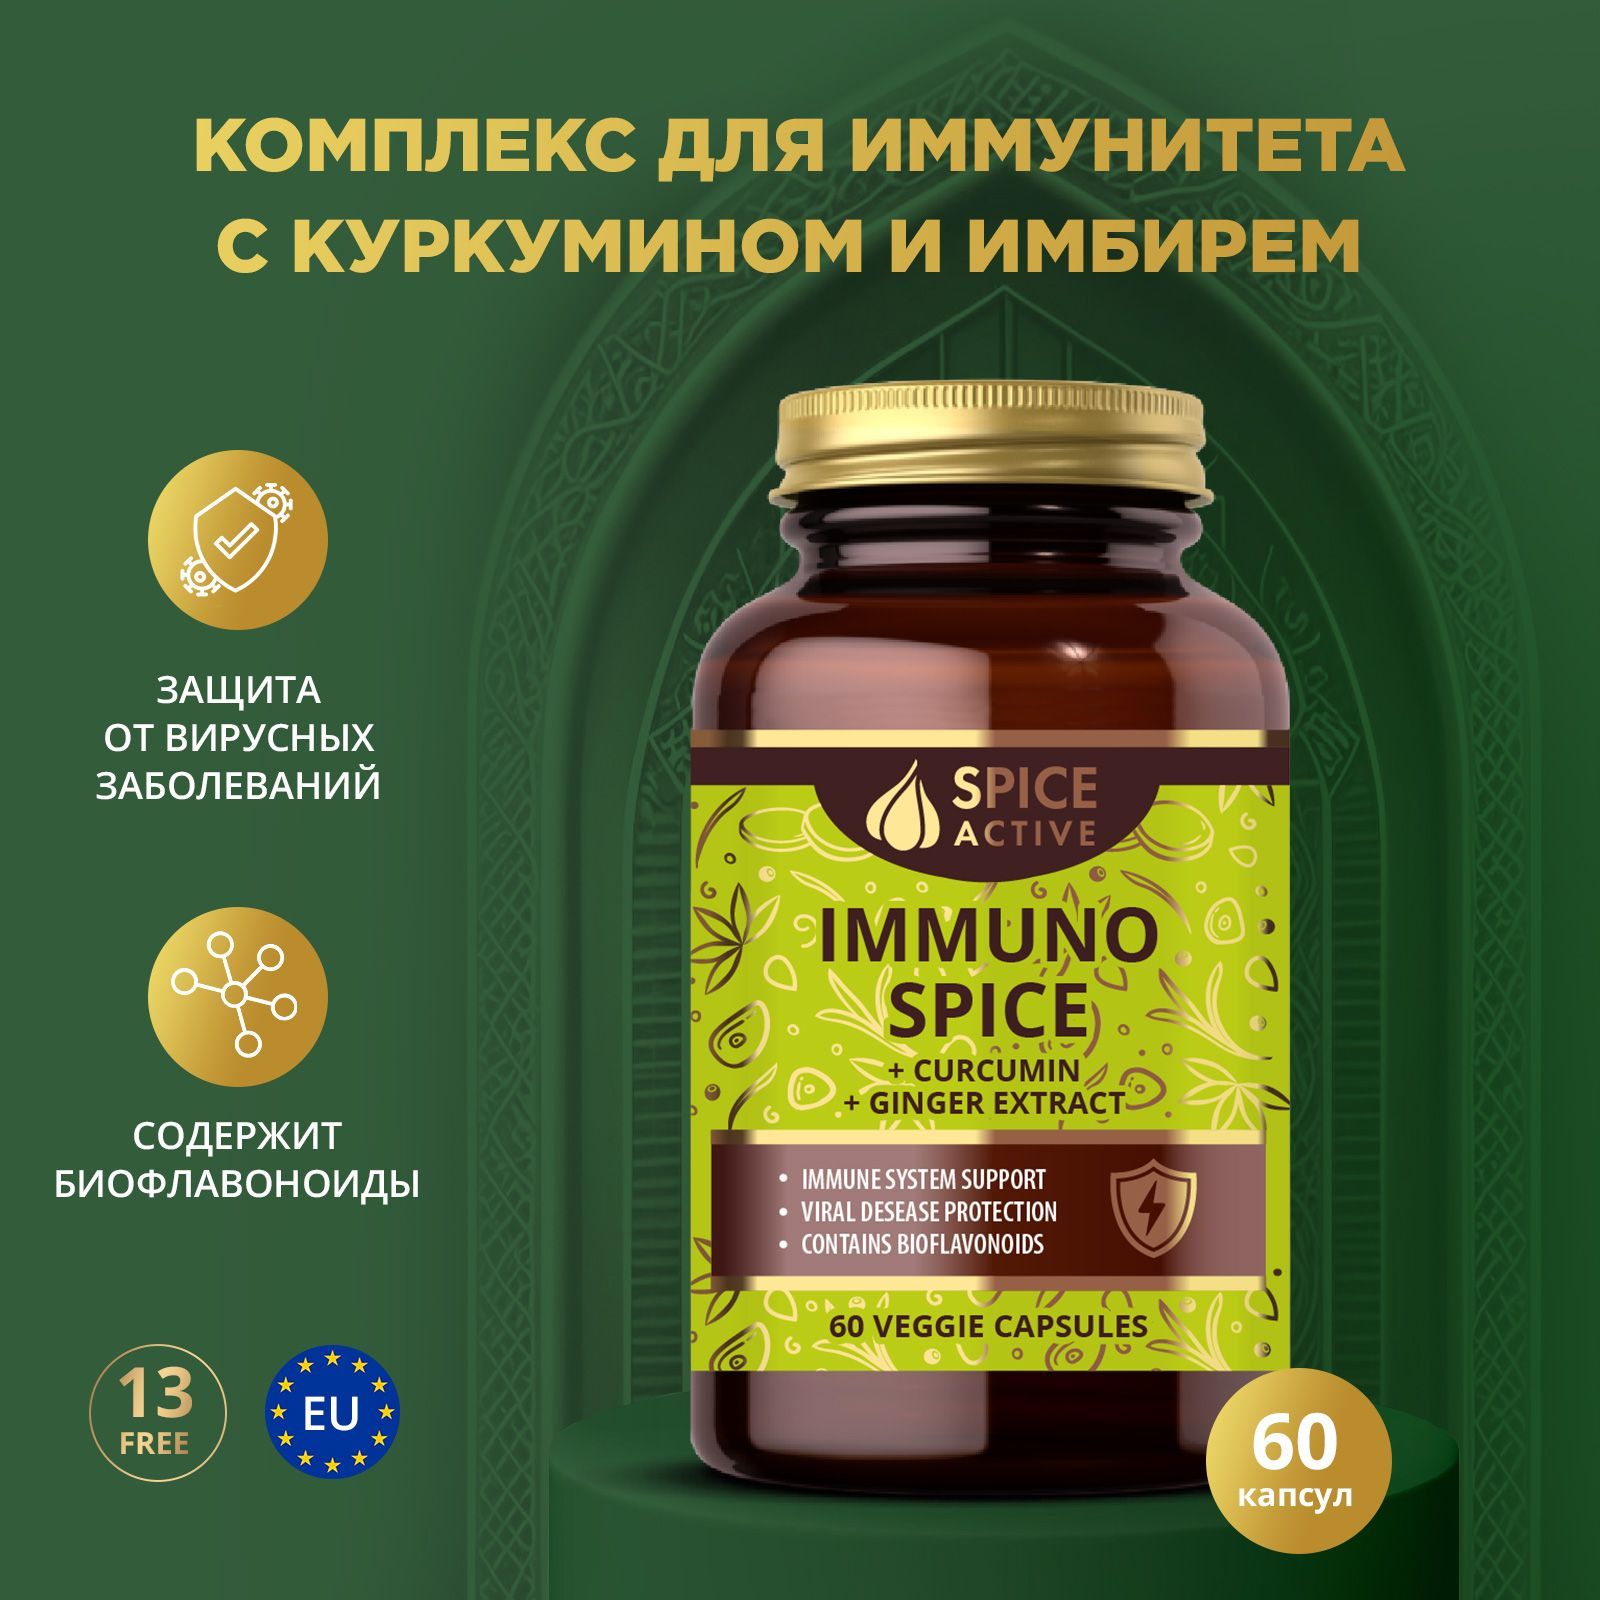 Spice active